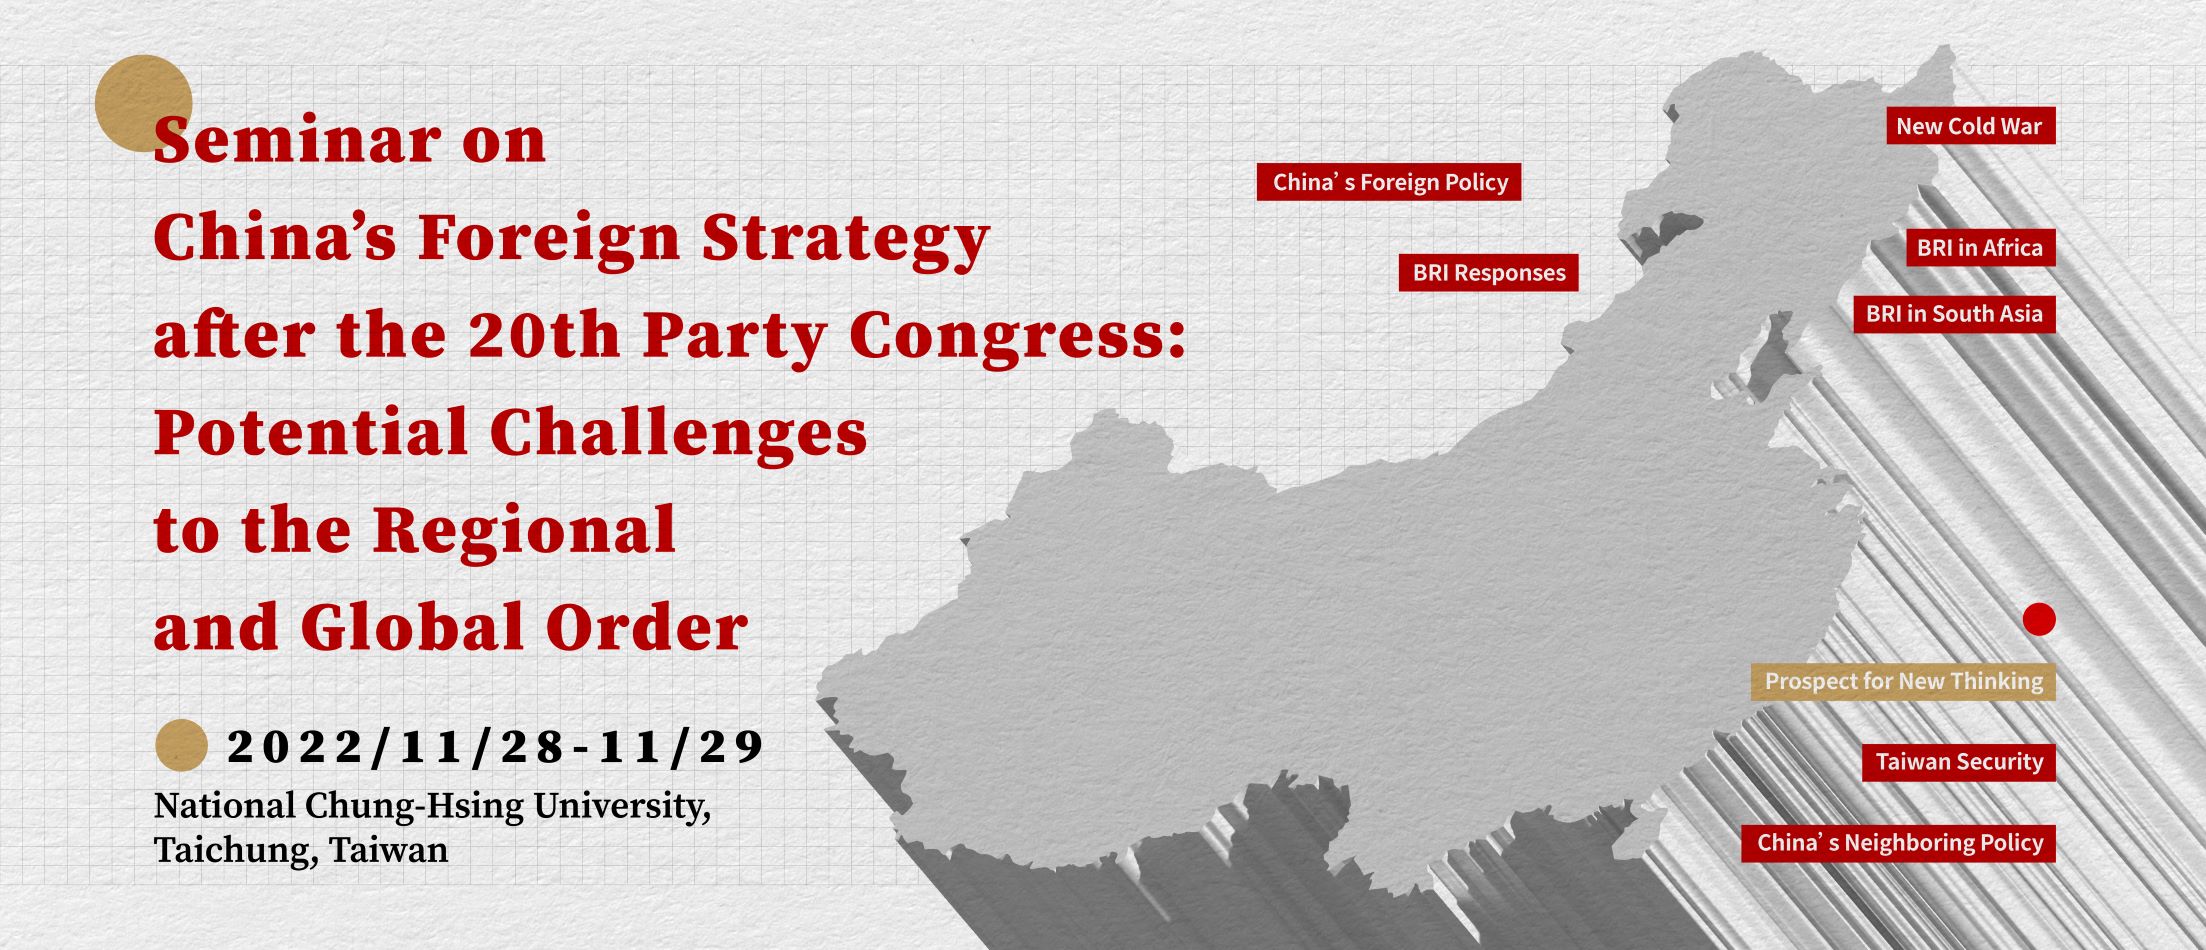 Seminar on China’s Foreign Strategy after the 20th Party Congress: Potential Challenges to the Regional and Global Order